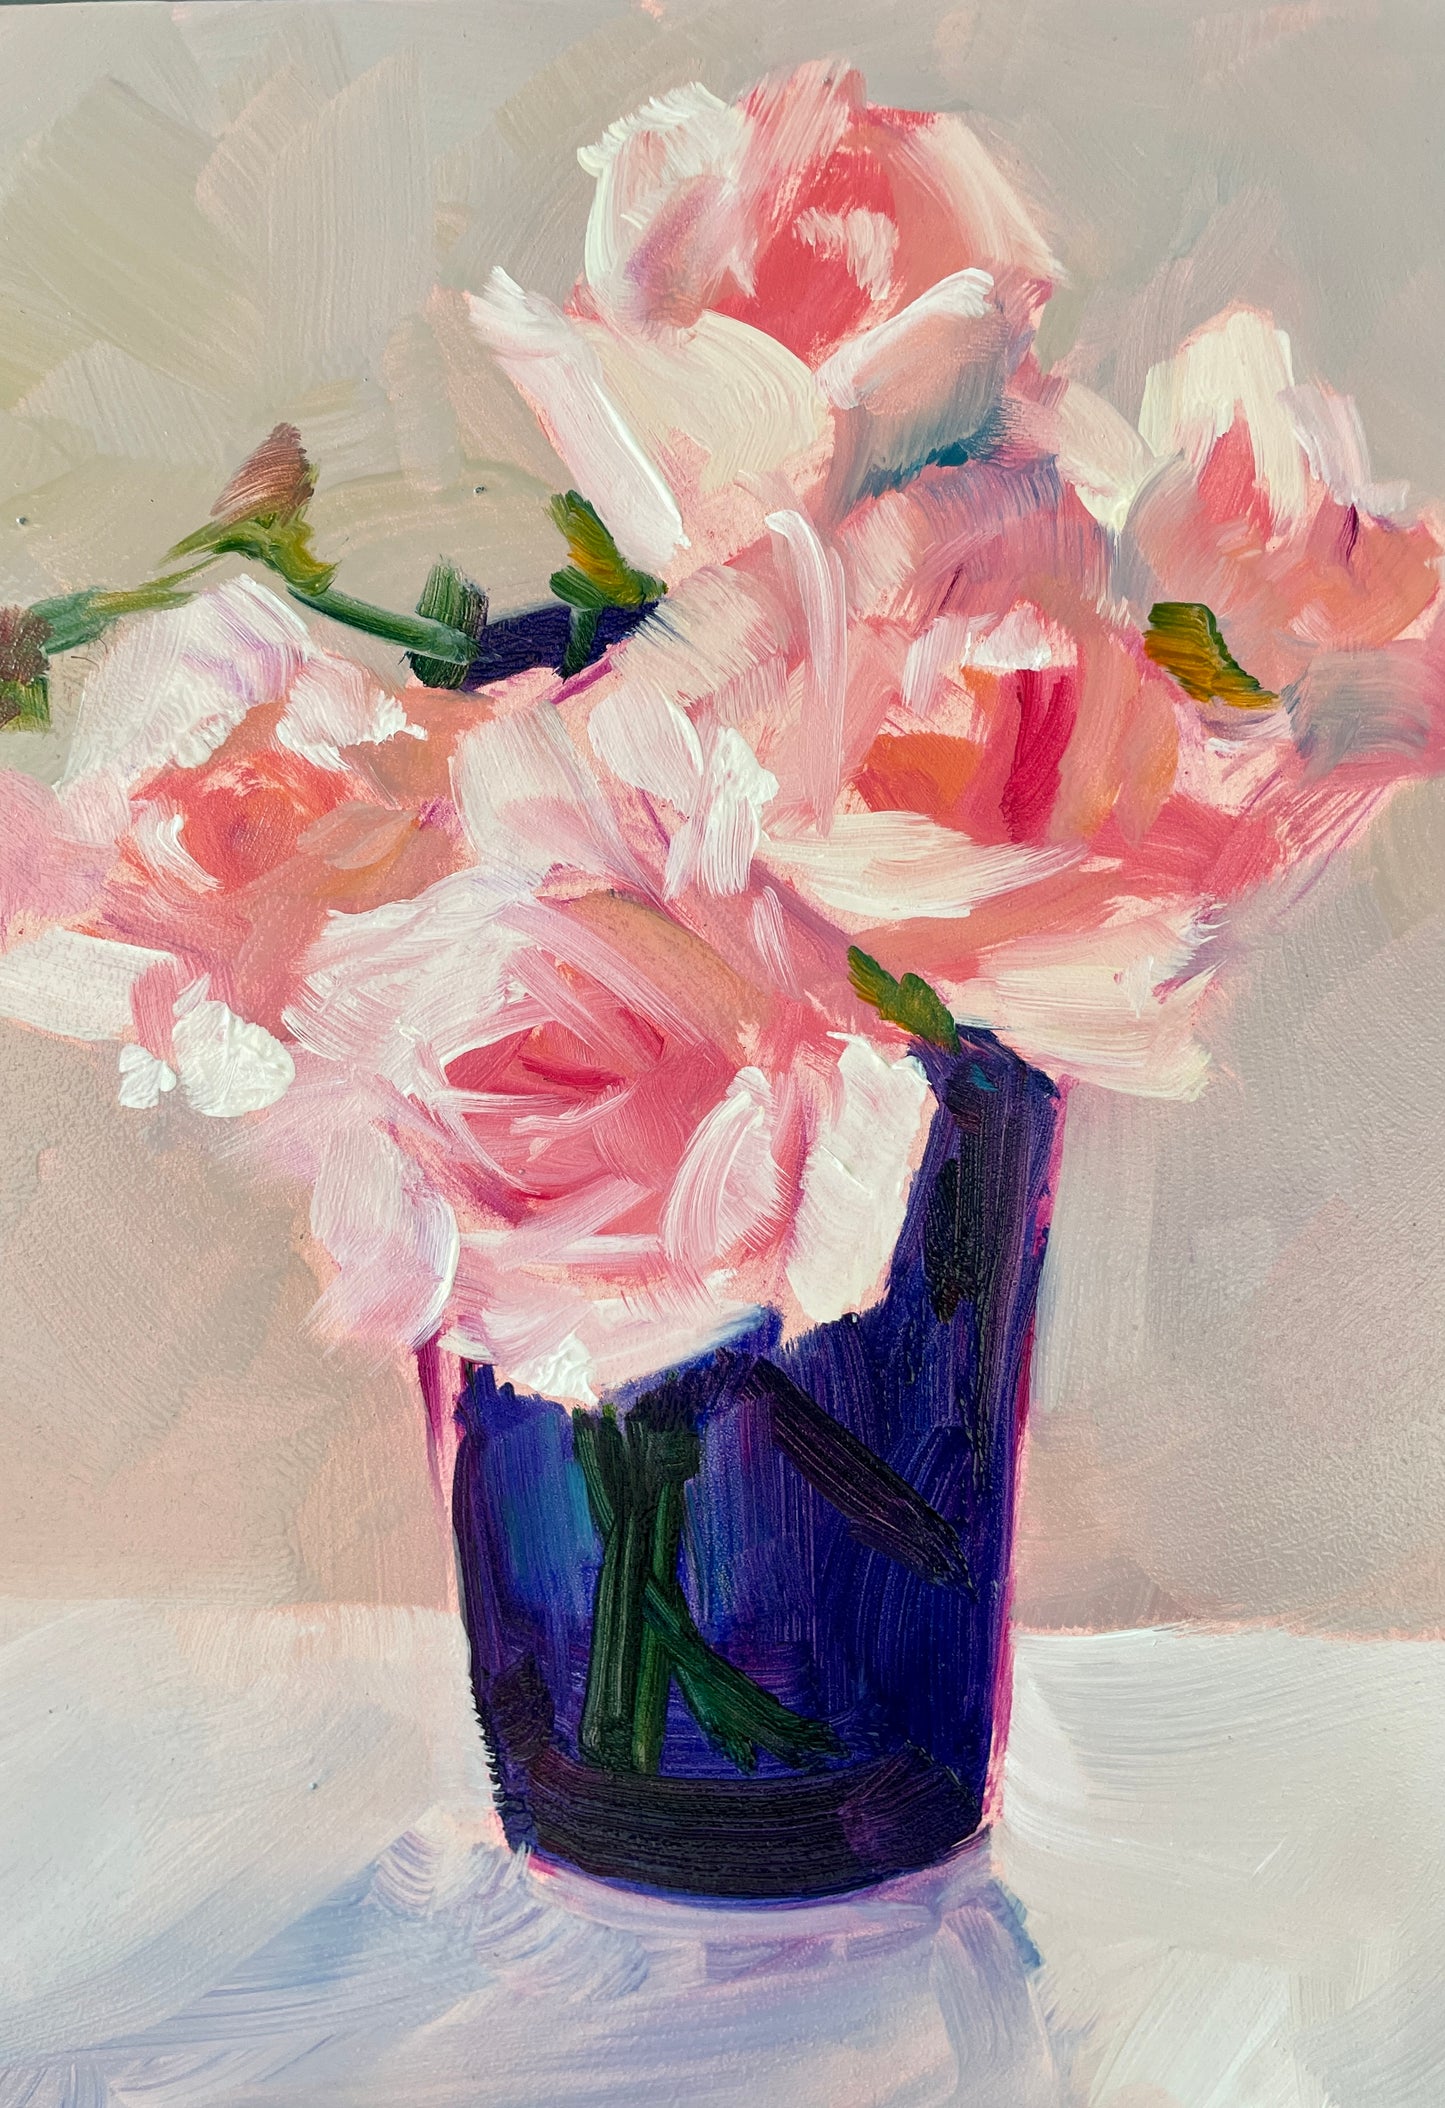 Pink Roses in Blue Glass Original Oil Painting, 5x7 inches, Unframed